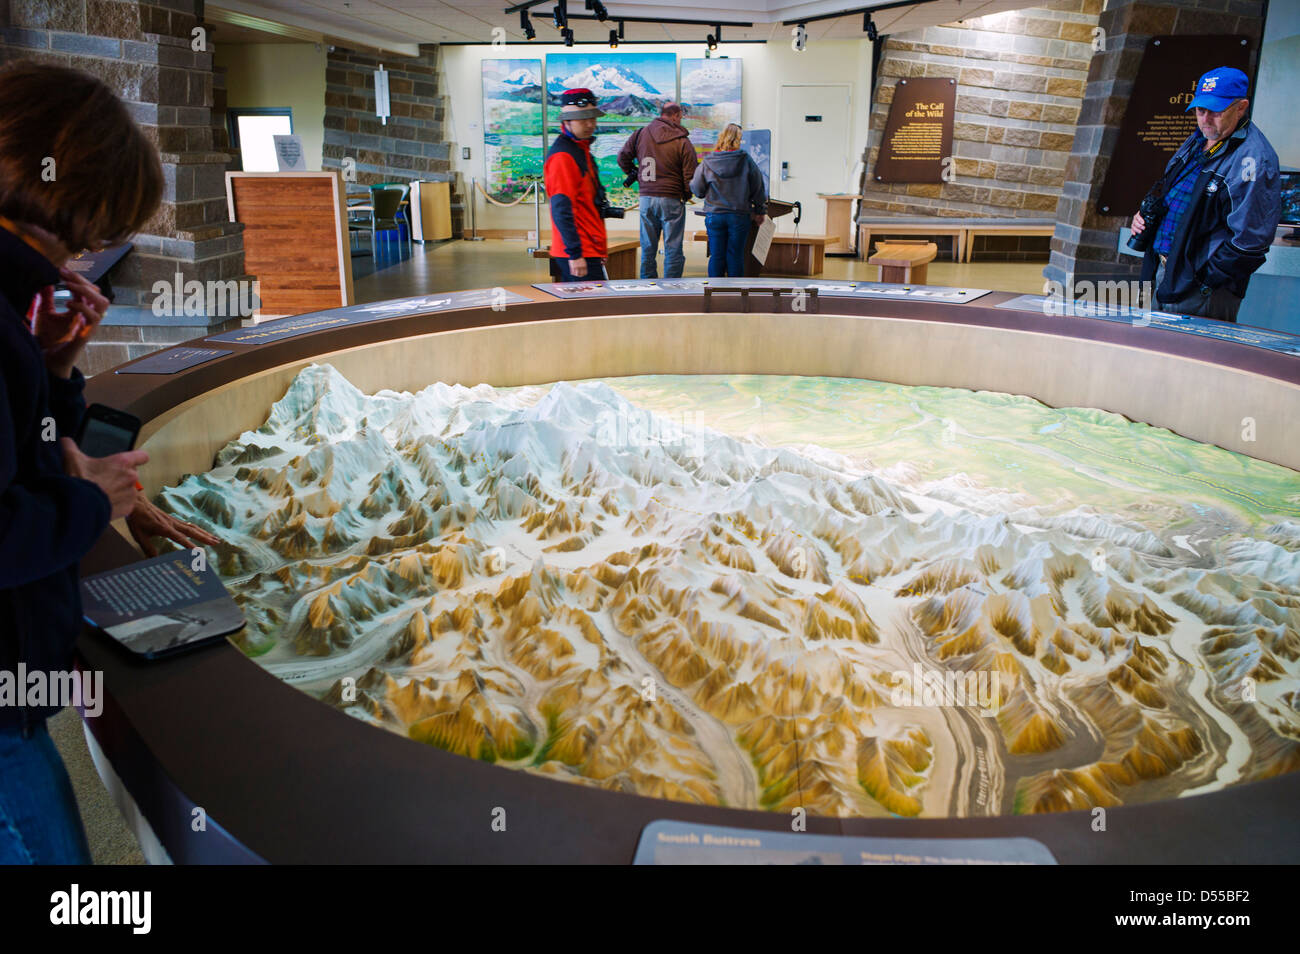 Park visitors view a three dimensional topographical map on display, Eielson Visitor Center, Denali National Park, Alaska, USA Stock Photo